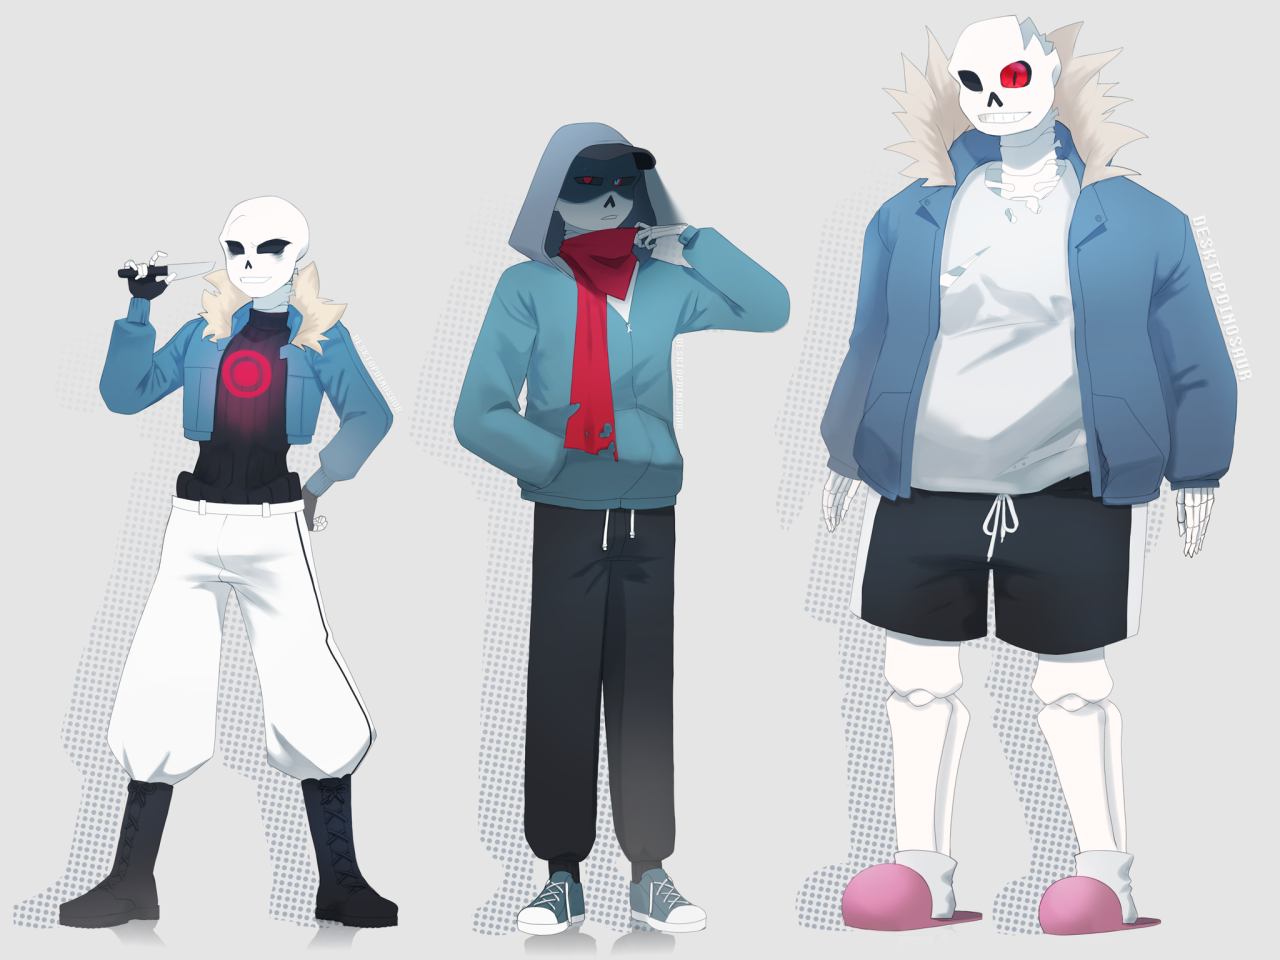 Undertale❤️ Sans fight. 1 1 Project by Fantastic Icecream